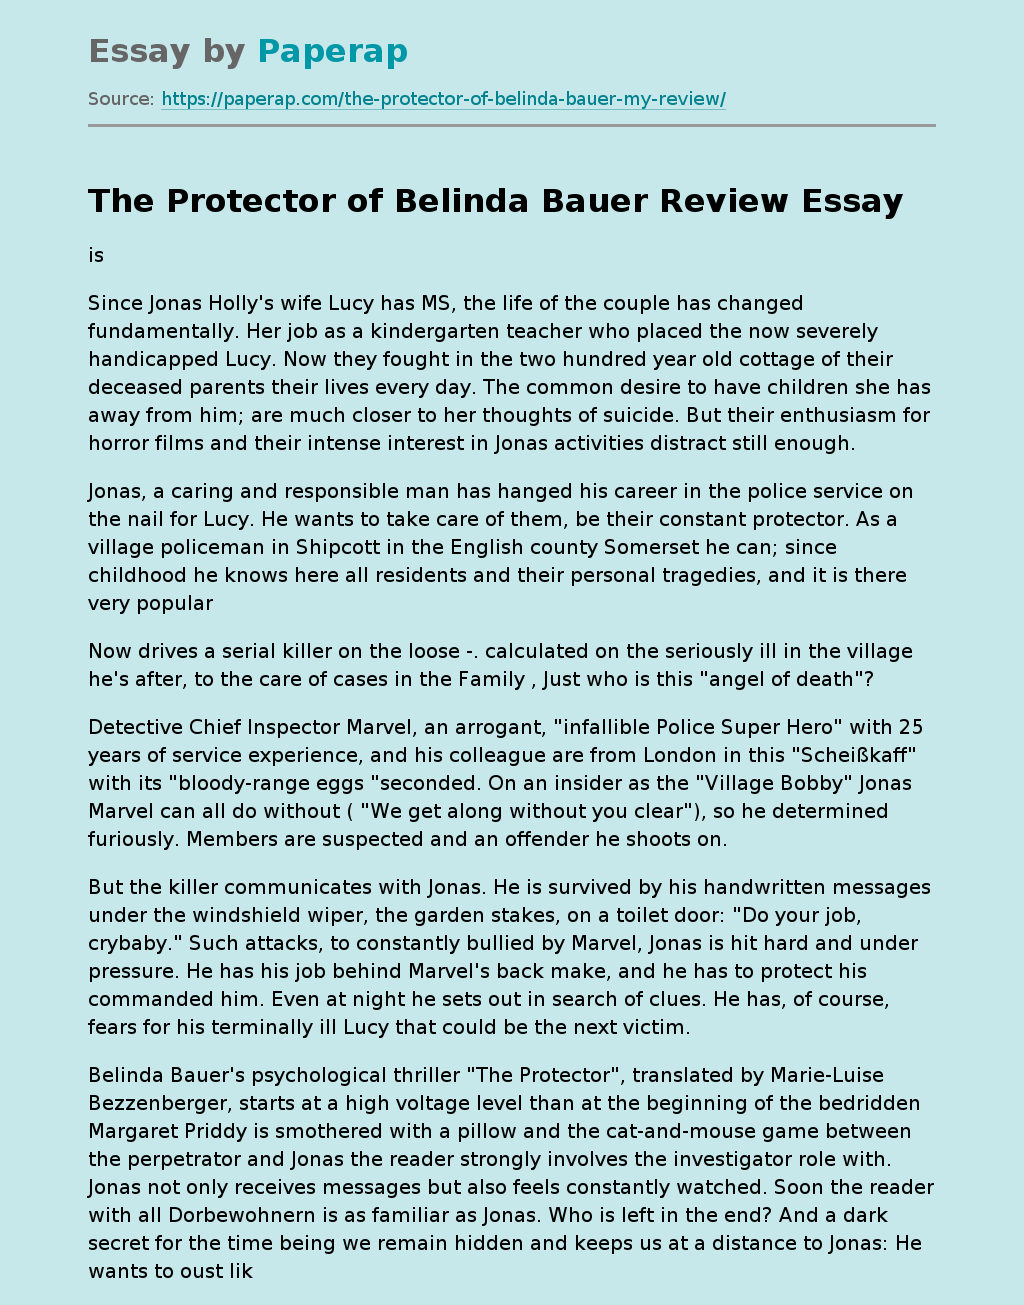 The Protector of Belinda Bauer Review